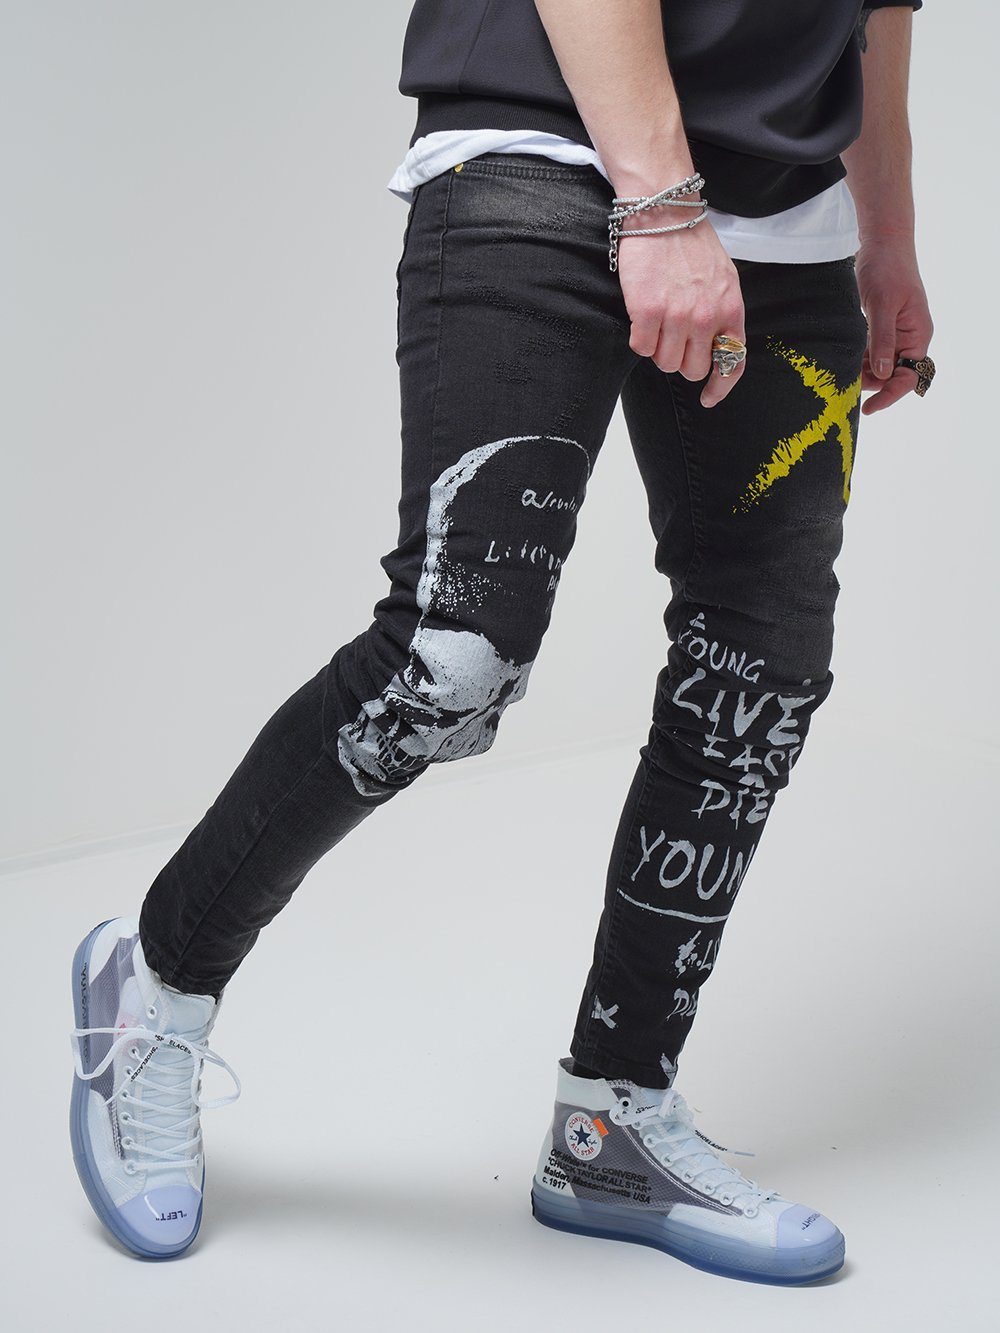 A man wearing a pair of DEAN jeans with graffiti on them.